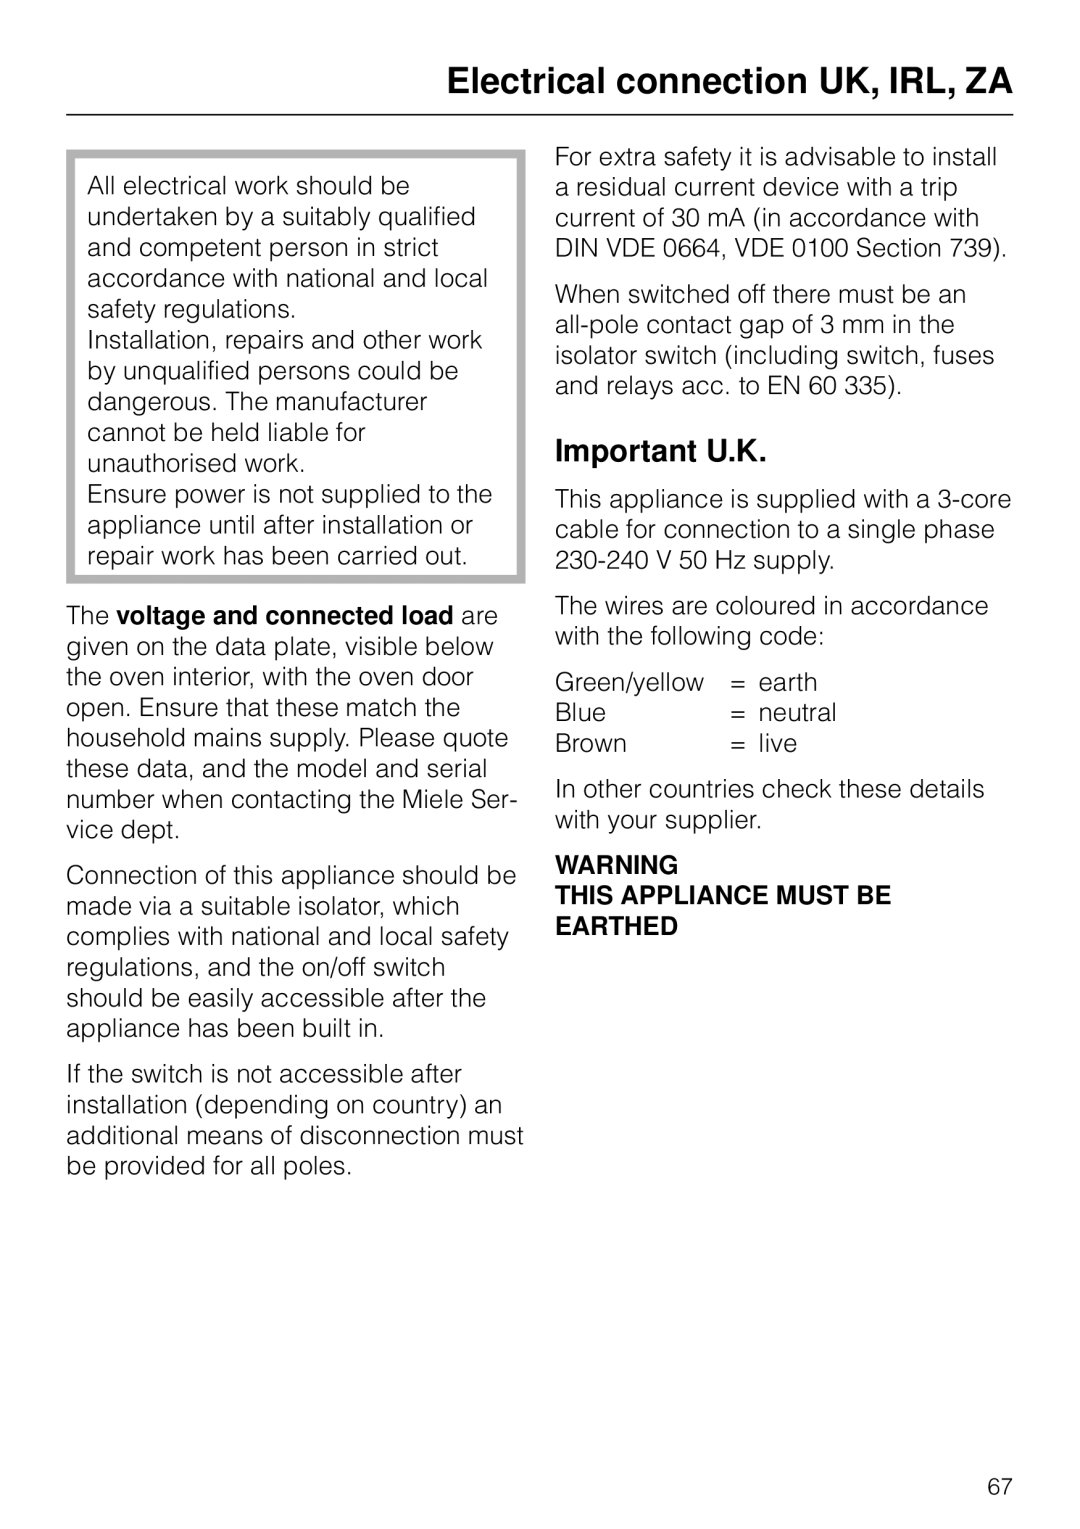 Miele H 4170, H4270 operating instructions Electrical connection UK, IRL, ZA, Important U.K 